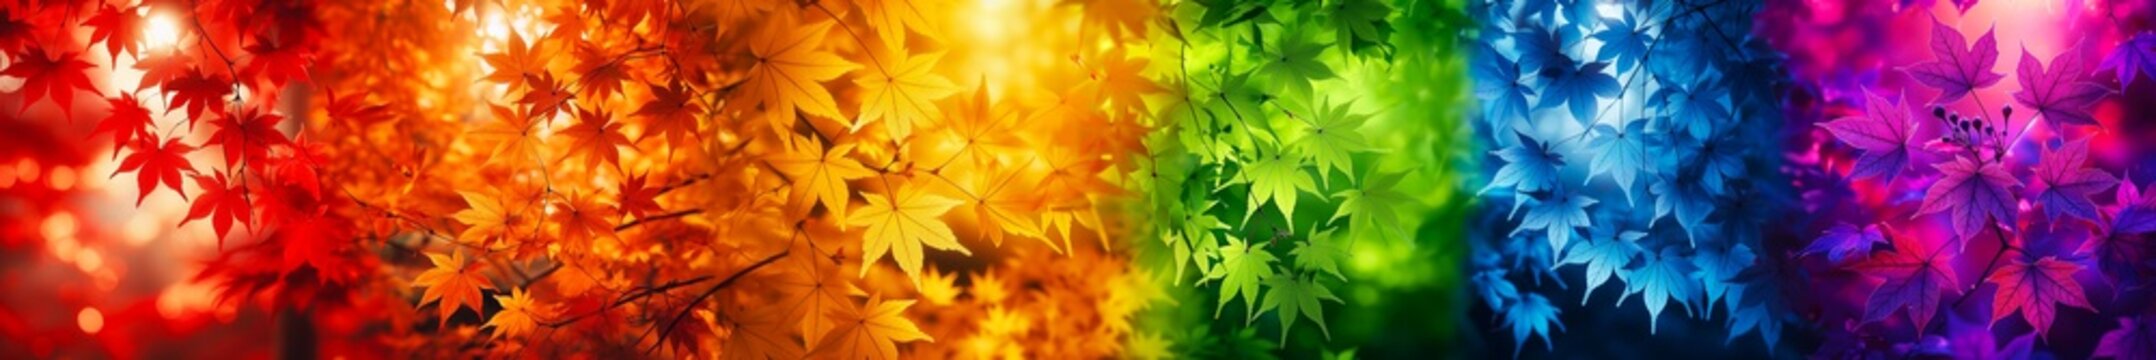 Pride in Nature: A Colorful Collection of Maple Leaves Painted in the Vibrant Hues of the Rainbow